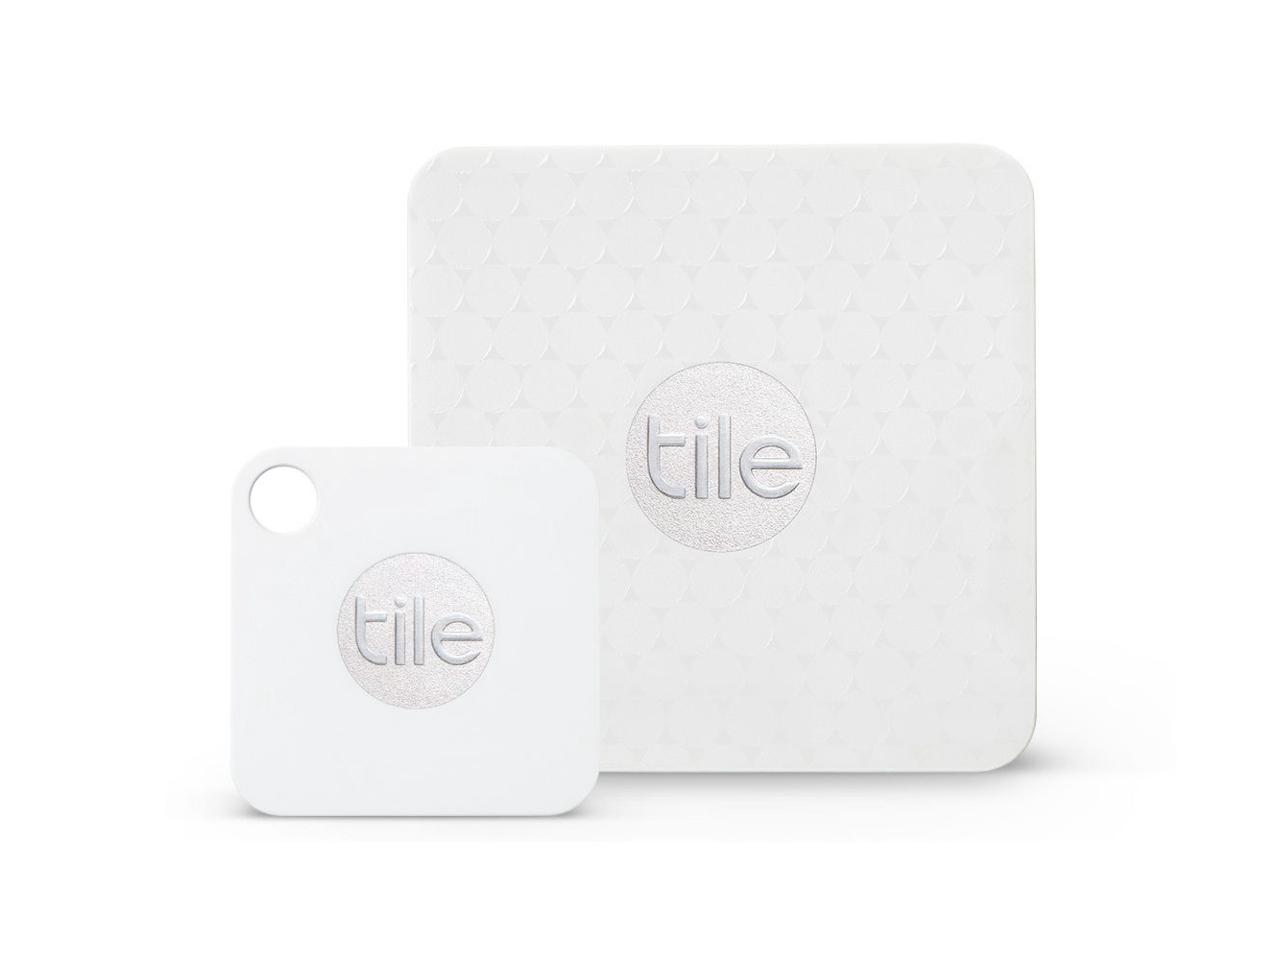 Tile Mate and Slim Combo Pack 4 Pack White Tracker Key Phone Bluetooth